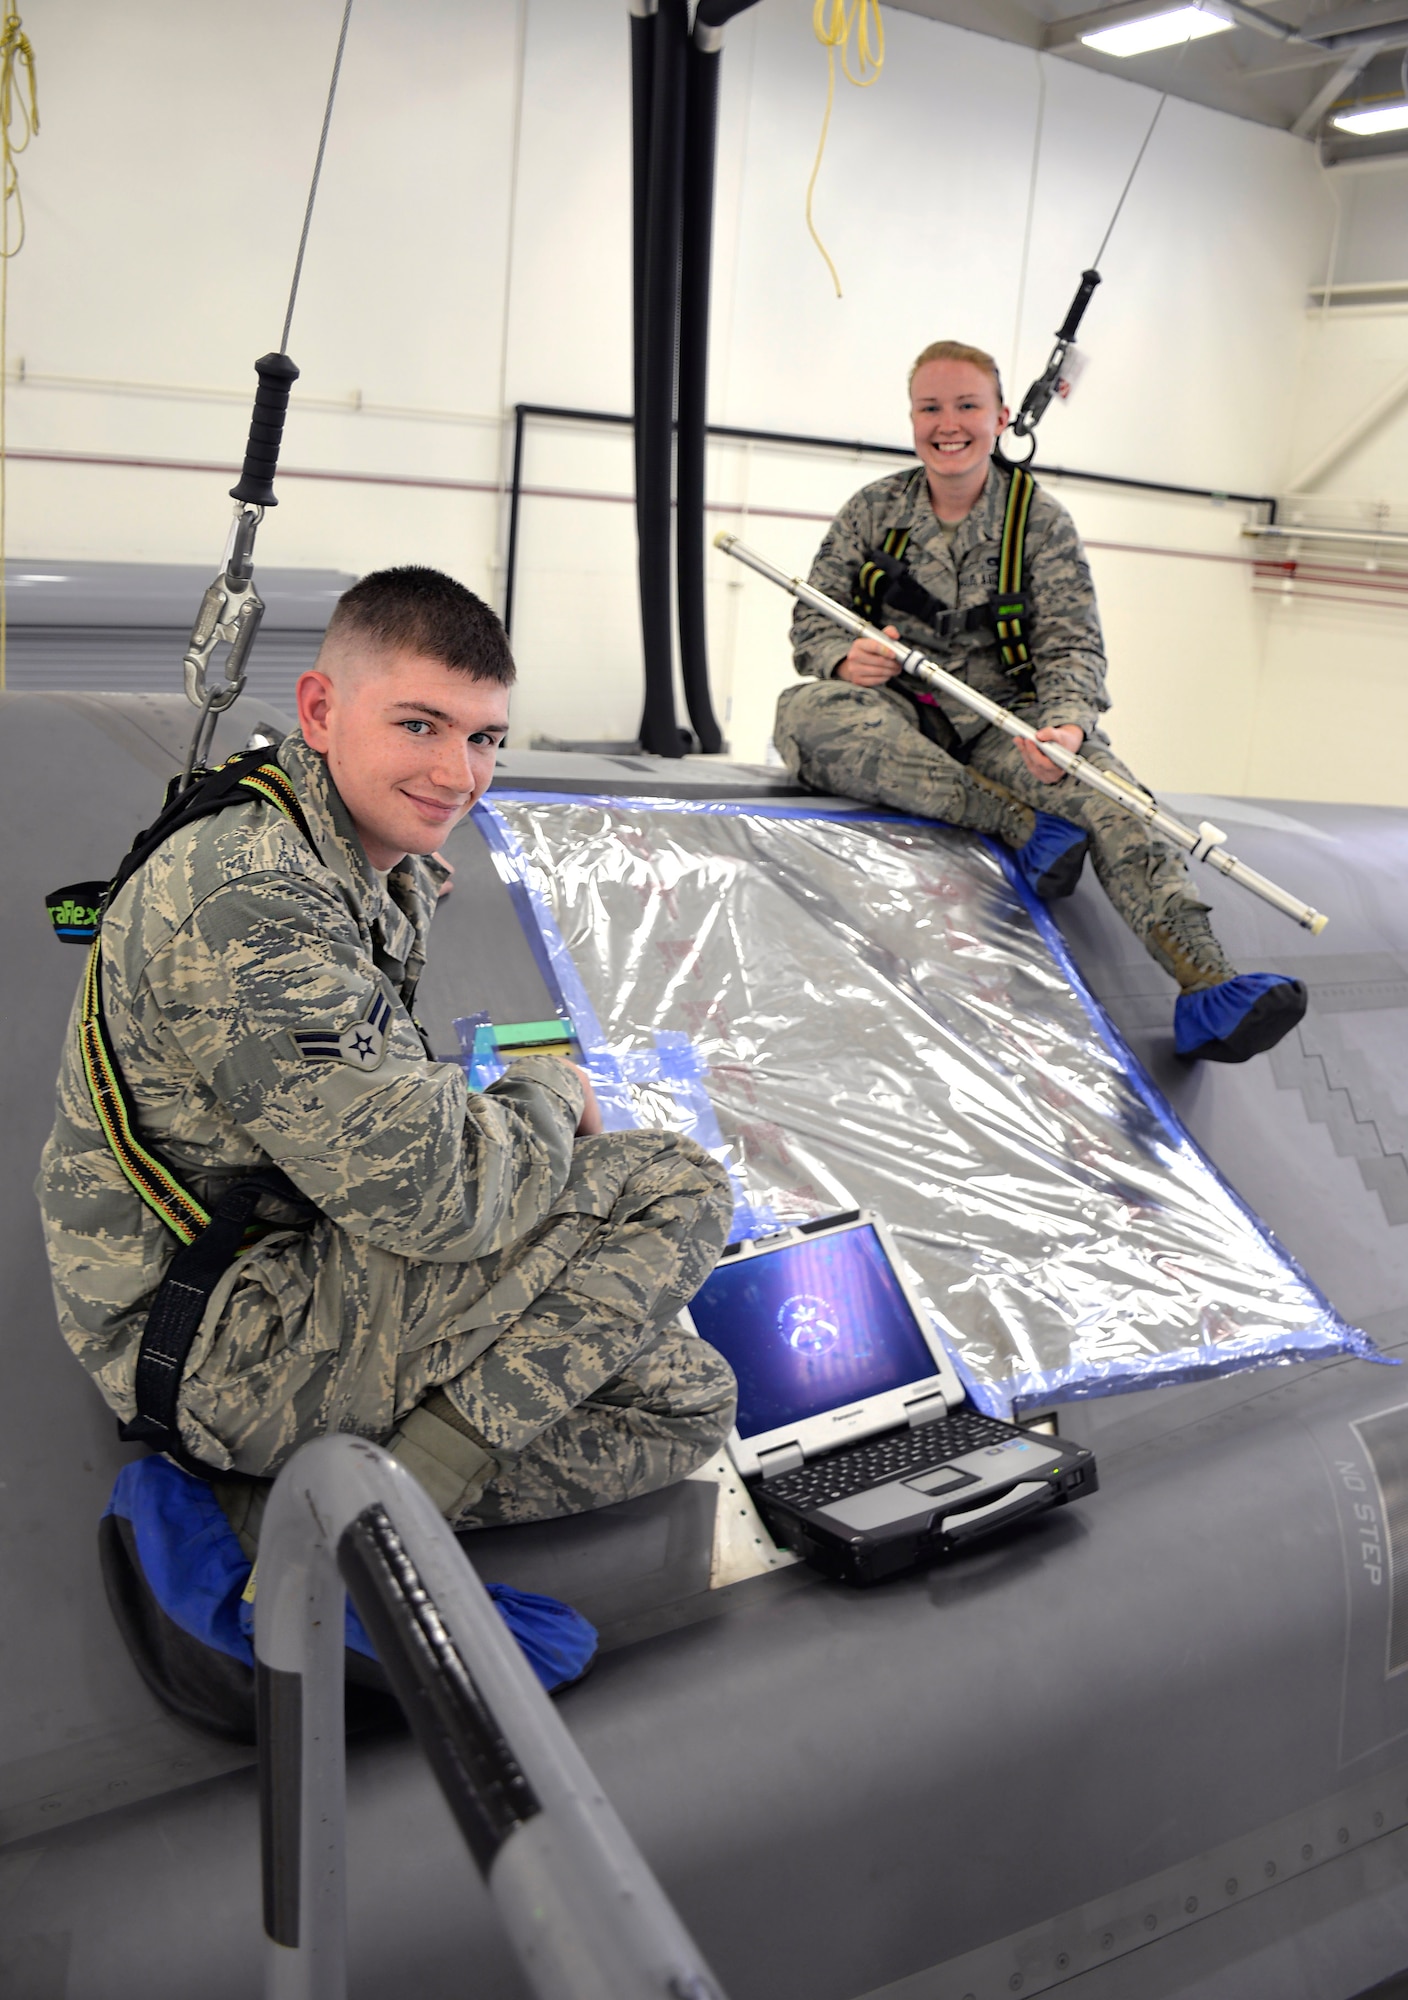 Airman 1st Class William Manion, 33rd Maintenance Squadron fuel systems apprentice, and Airman Samantha Schmedeke, 33rd MXS fuel systems journeyman, conduct maintenance on an F-35A Lightning II at Eglin Air Force Base, Fla., May 16, 2016. Both Airmen are responsible for troubleshooting and correcting issues affecting the fuel systems in the fighter. (U.S. Air Force photo/Senior Airman Andrea Posey)